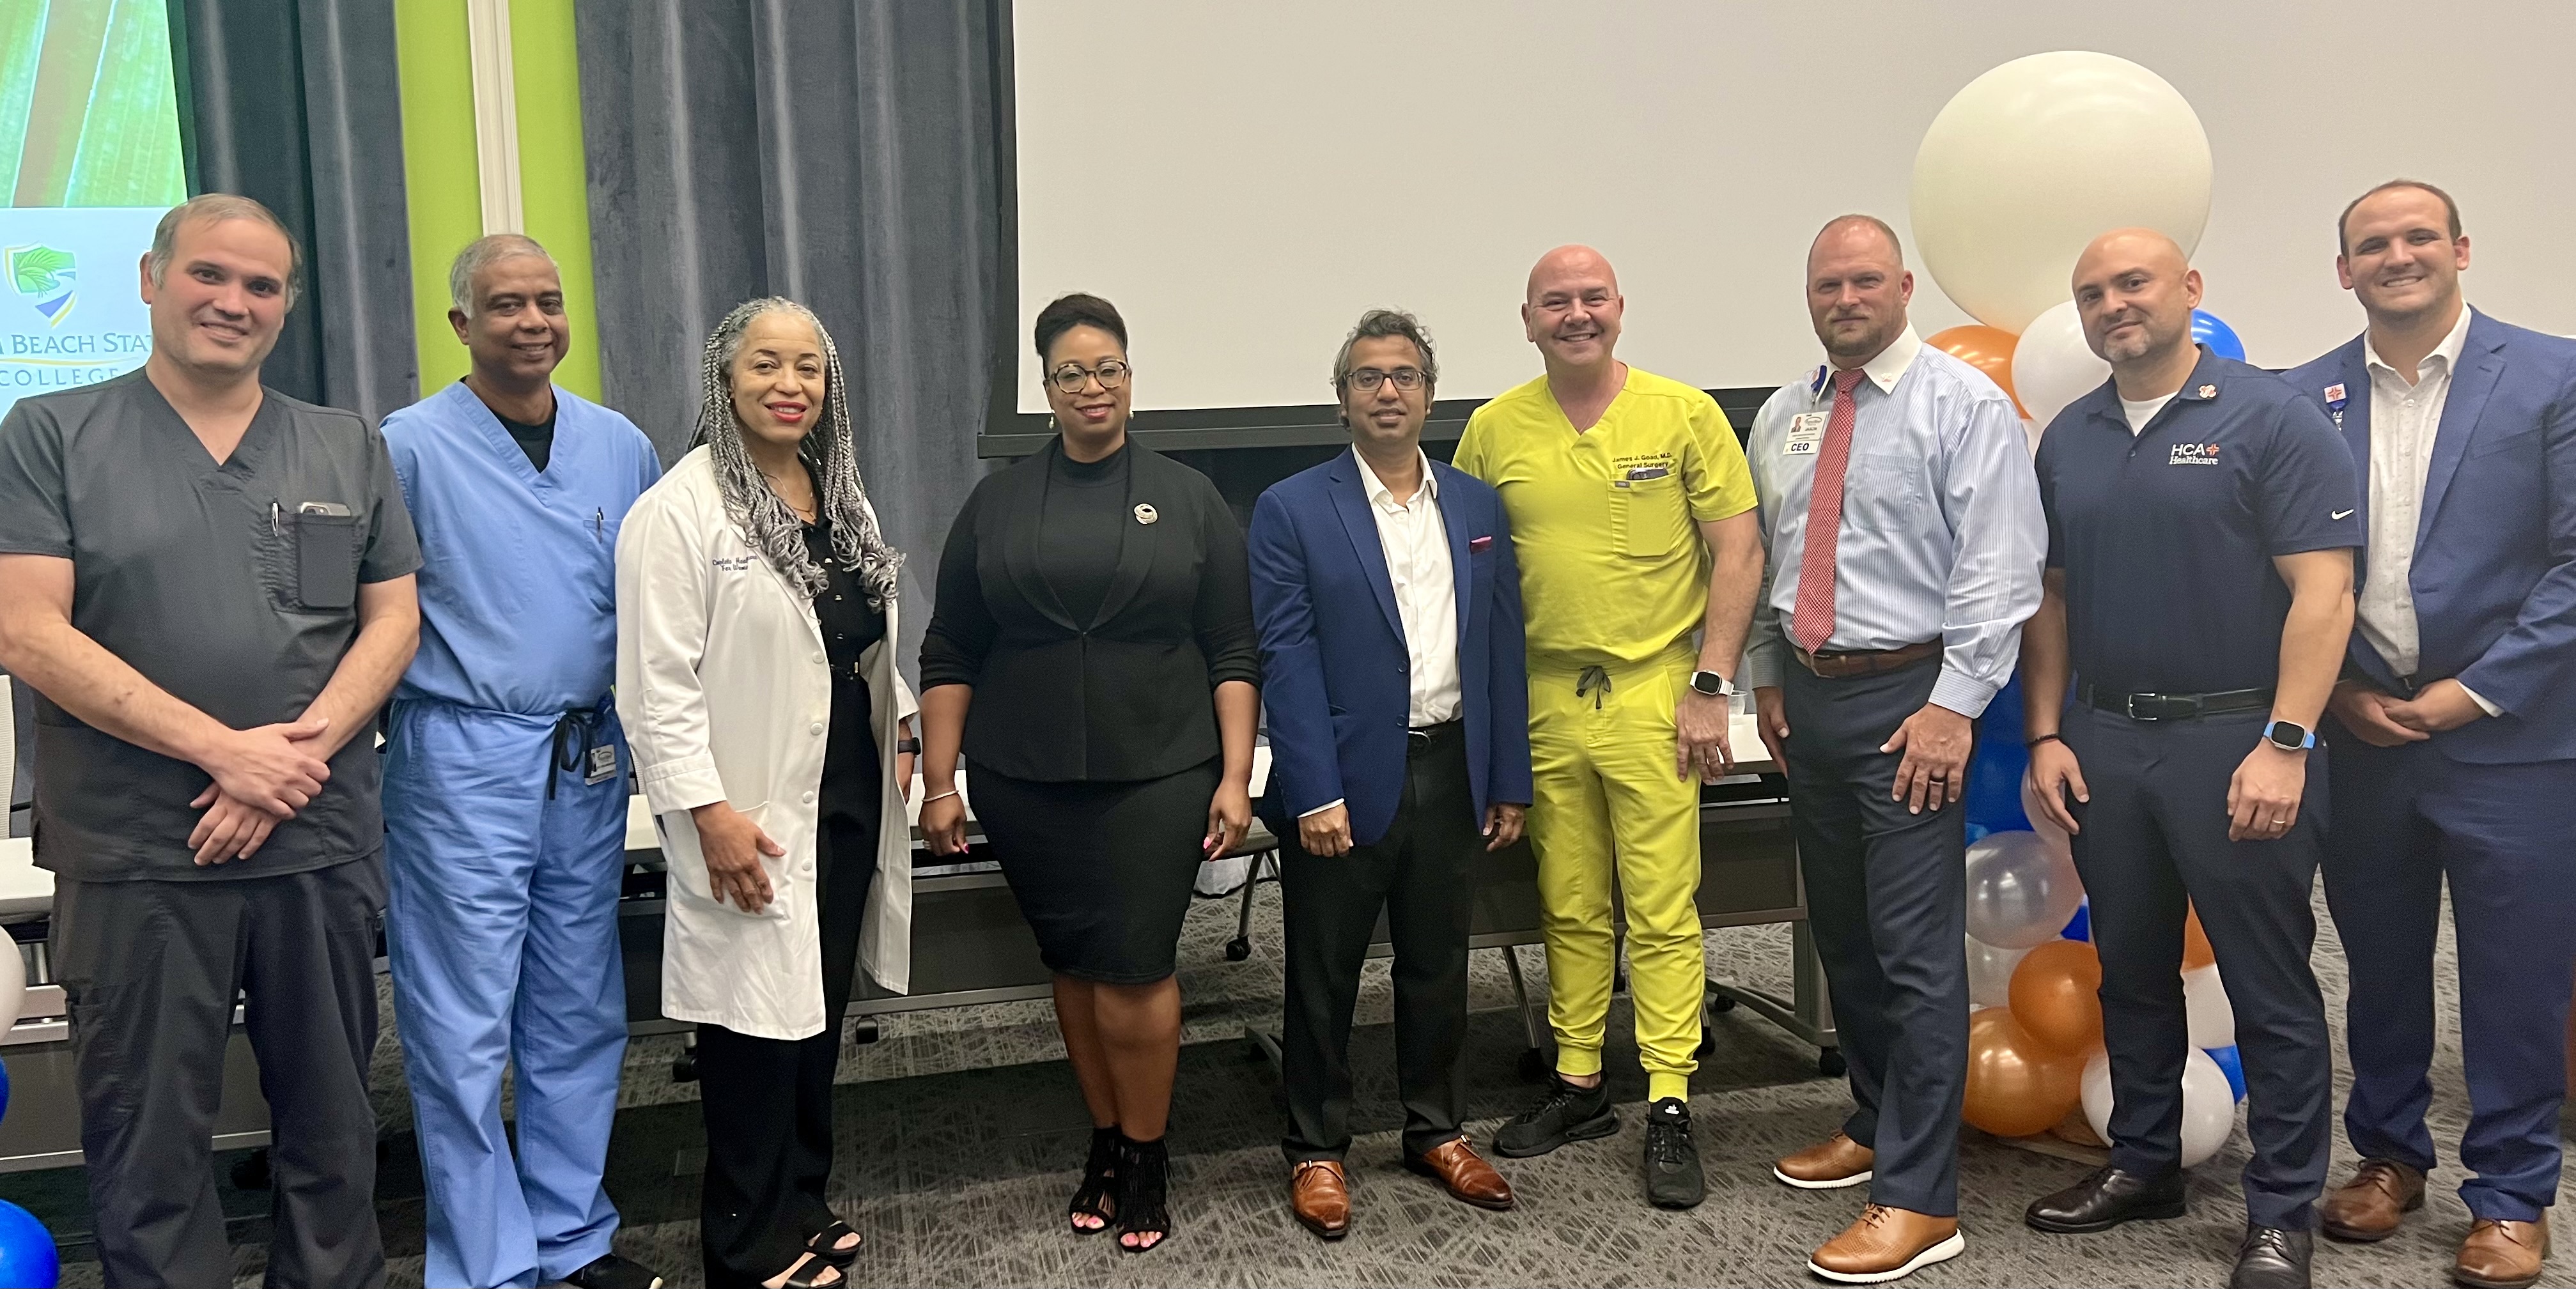 Group Photo: Dr. Fred Muhletaler, Dr. Arul Chidambaram, Dr. Colette Brown-Graham, Dr. Aliese Smith, Dr. James Goad, CEO Jason Kimbrell, Chief Medical Officer Alex Gumiroff and Chief Operating Officer Jamison Robinette pose after a panel discussion on Robotic surgery